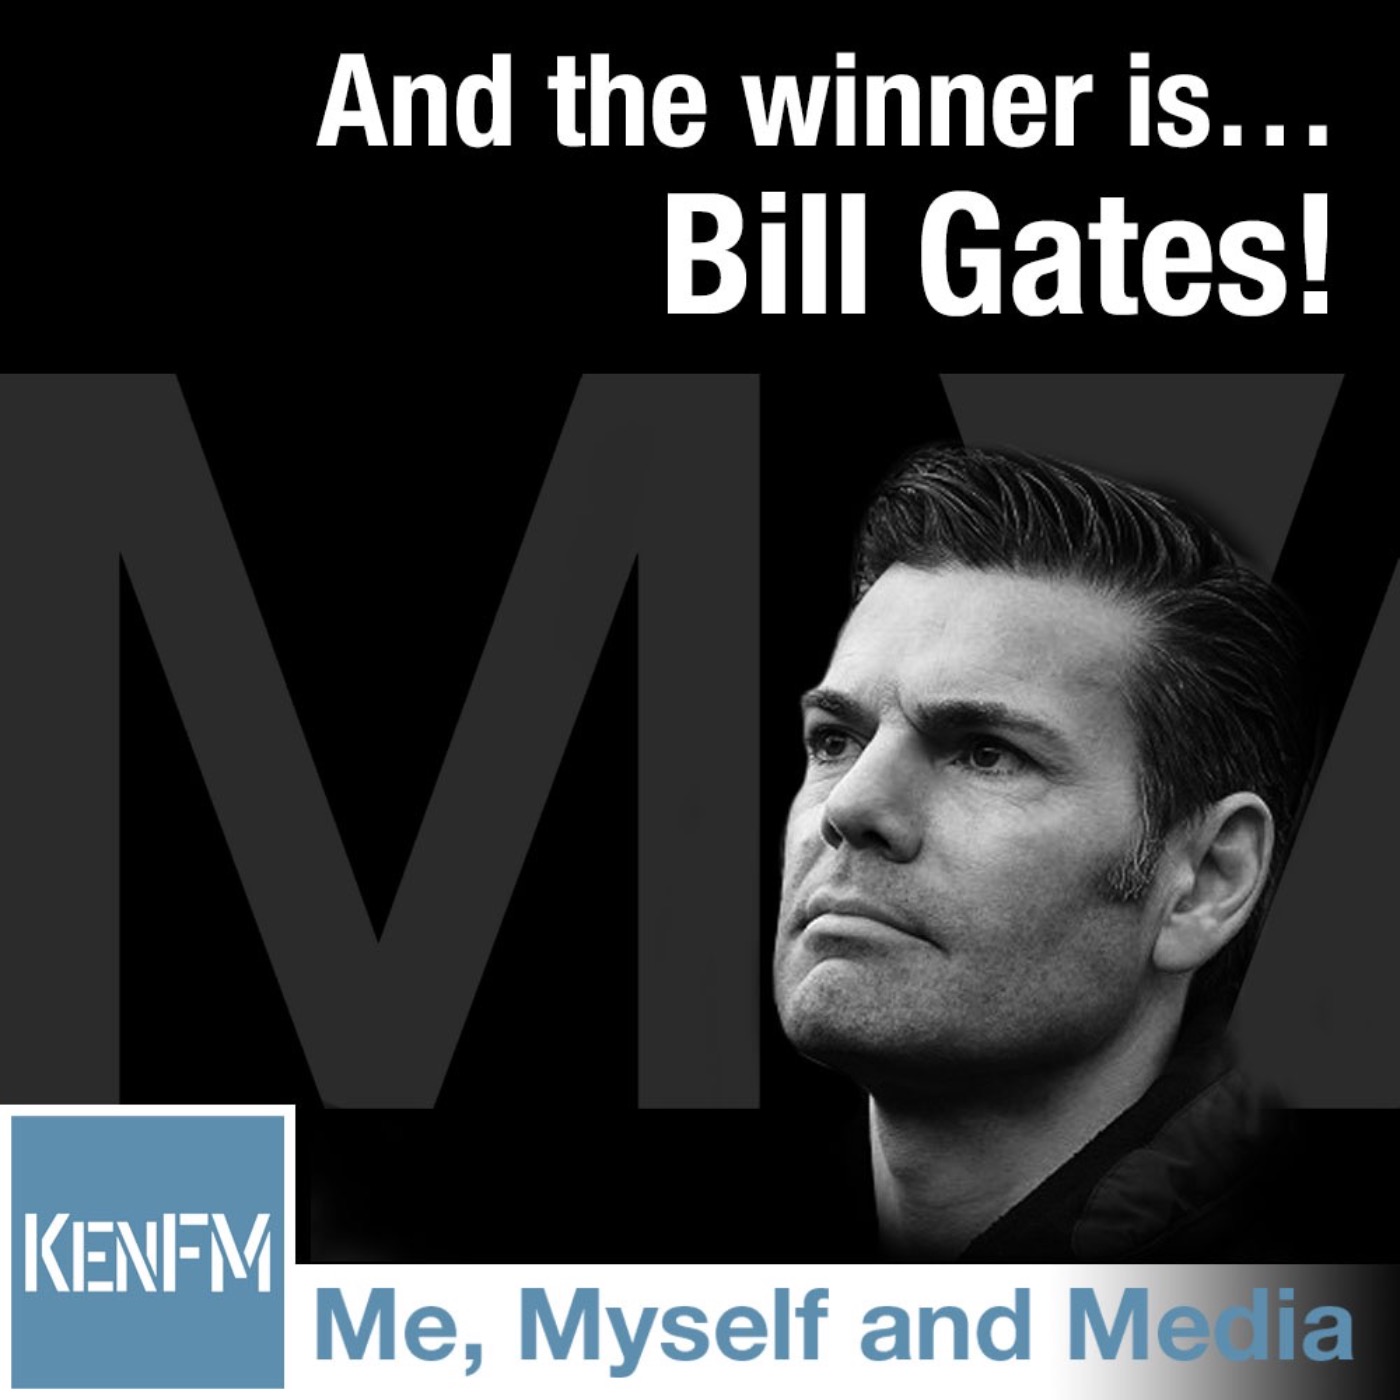 Me, Myself and Media 57 – And the winner is…Bill Gates!